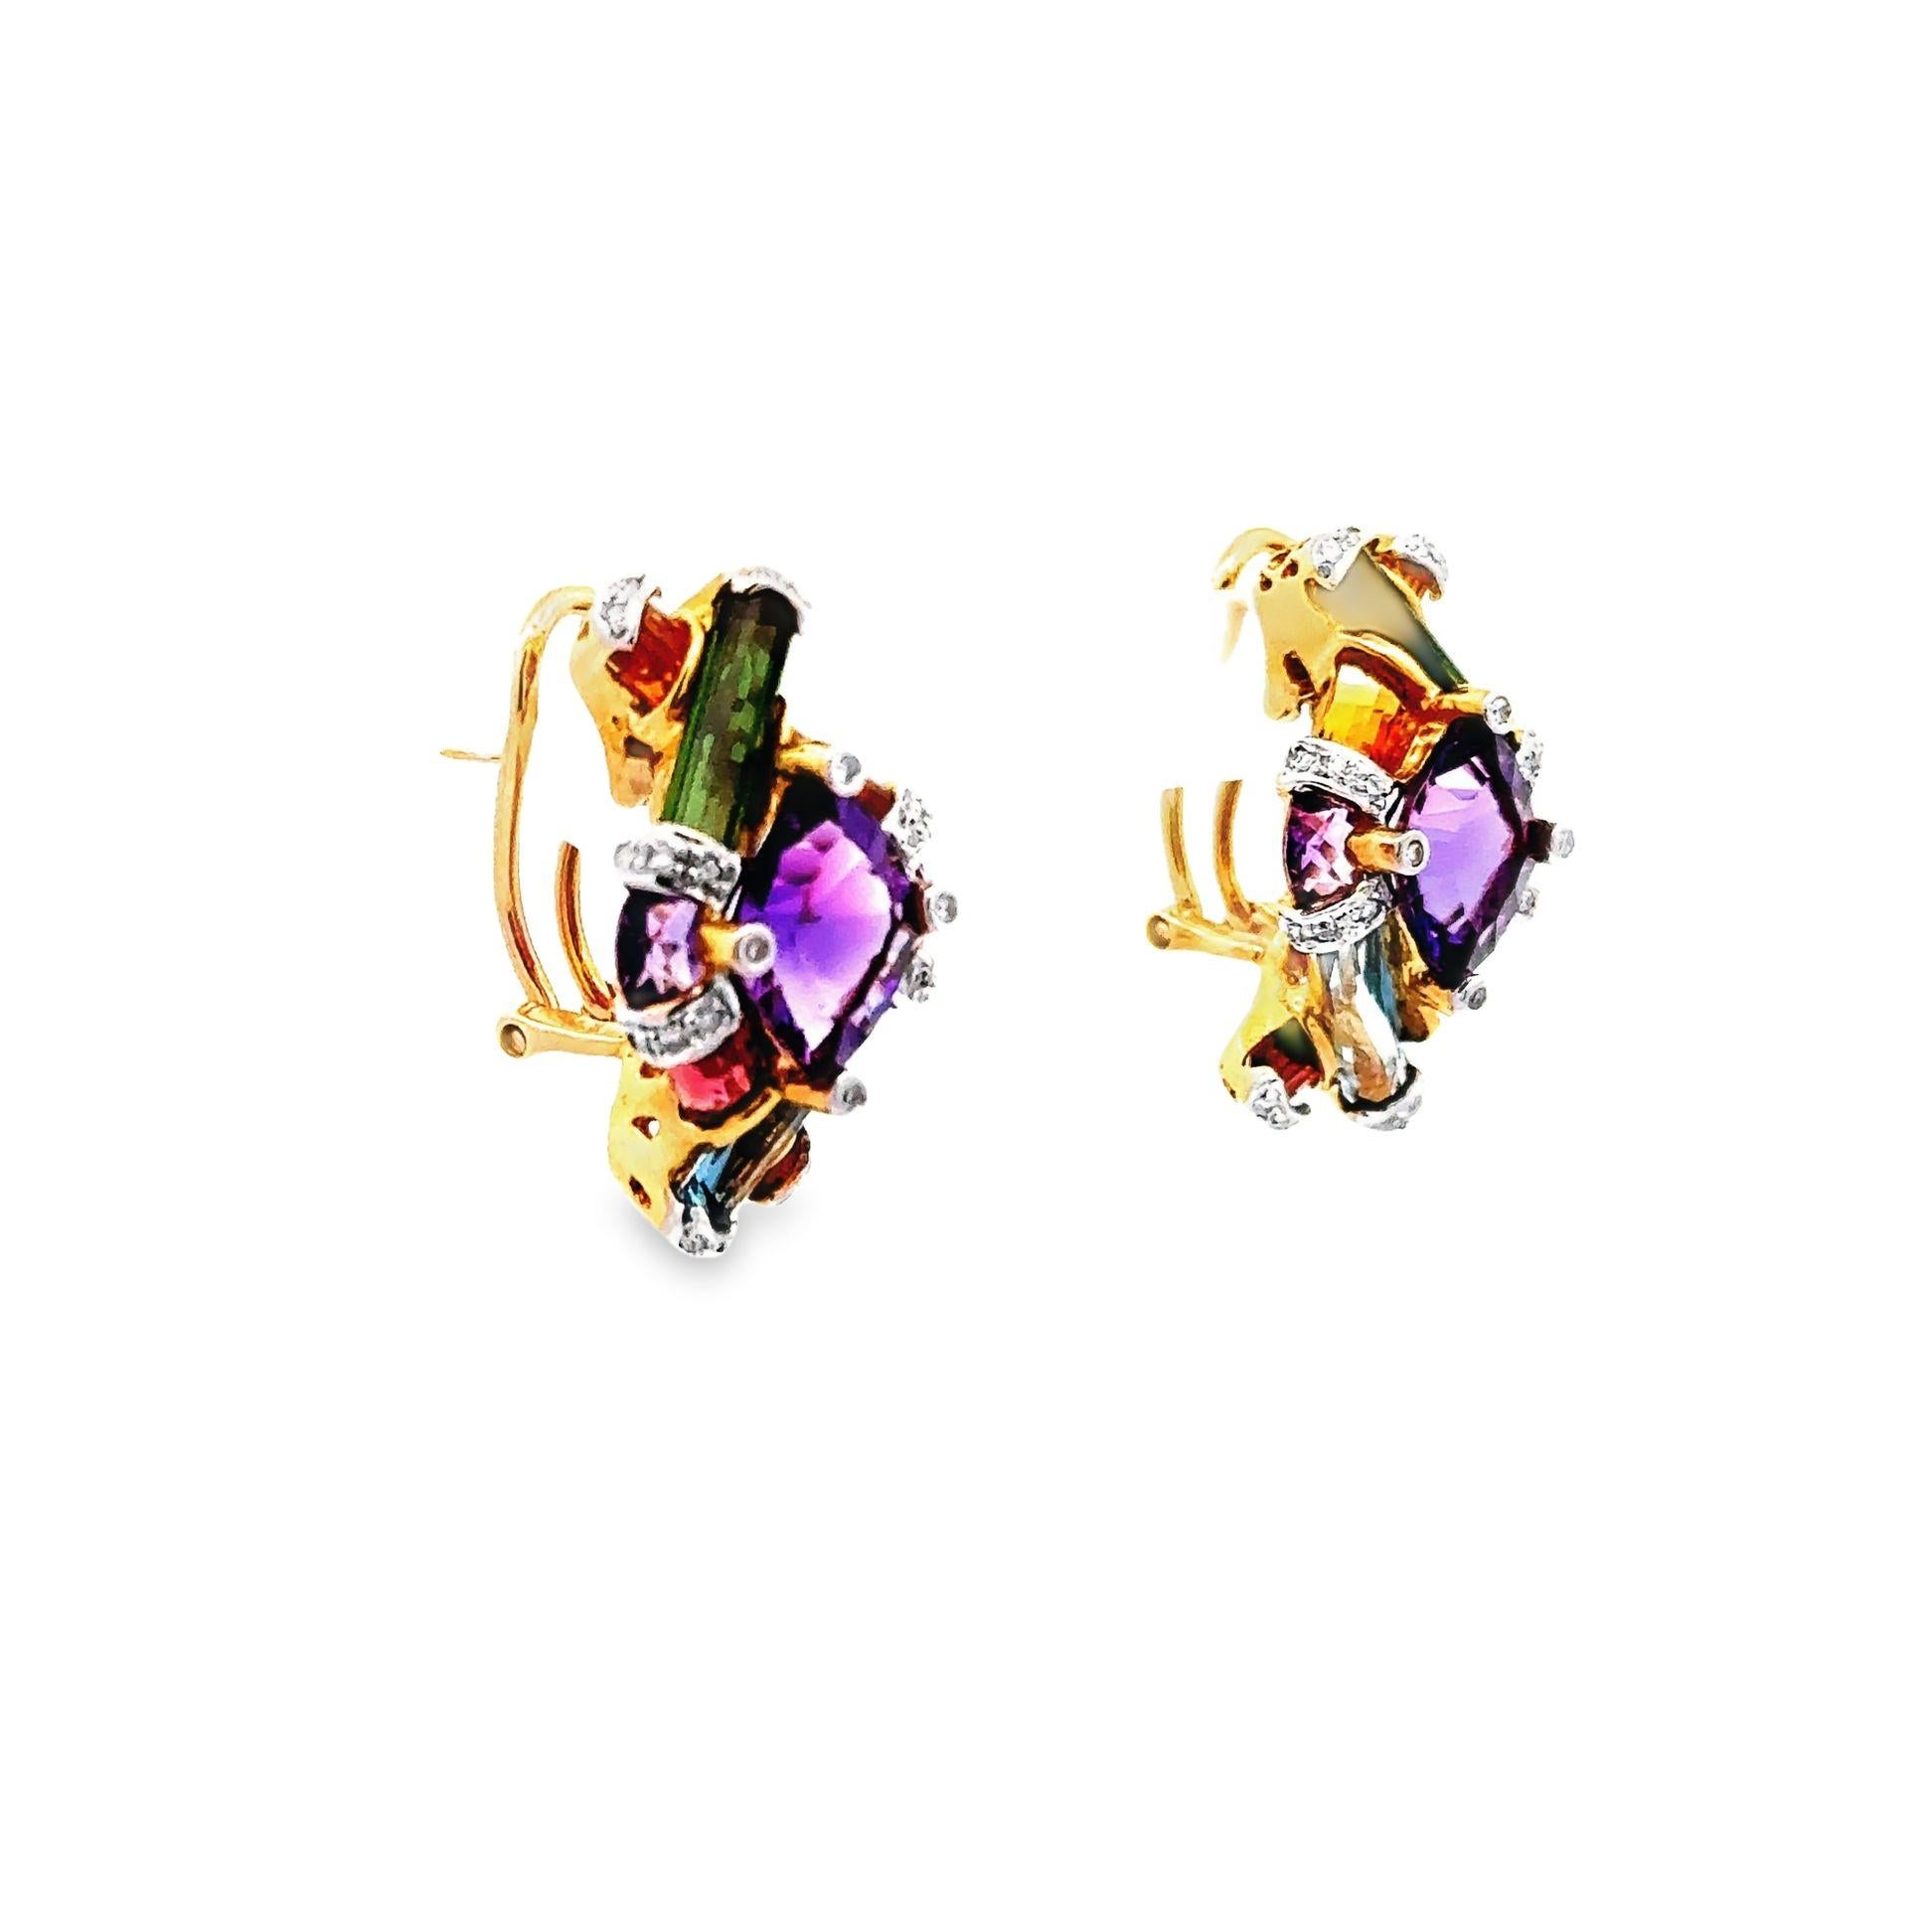 A bold pair of earrings with stunning and vibrant gemstones, while glittering natural diamonds add a brightness and solar style to the piece. This very finely crafted pair of earrings made in 18k yellow gold. They featured 0.28 carats of pave-set